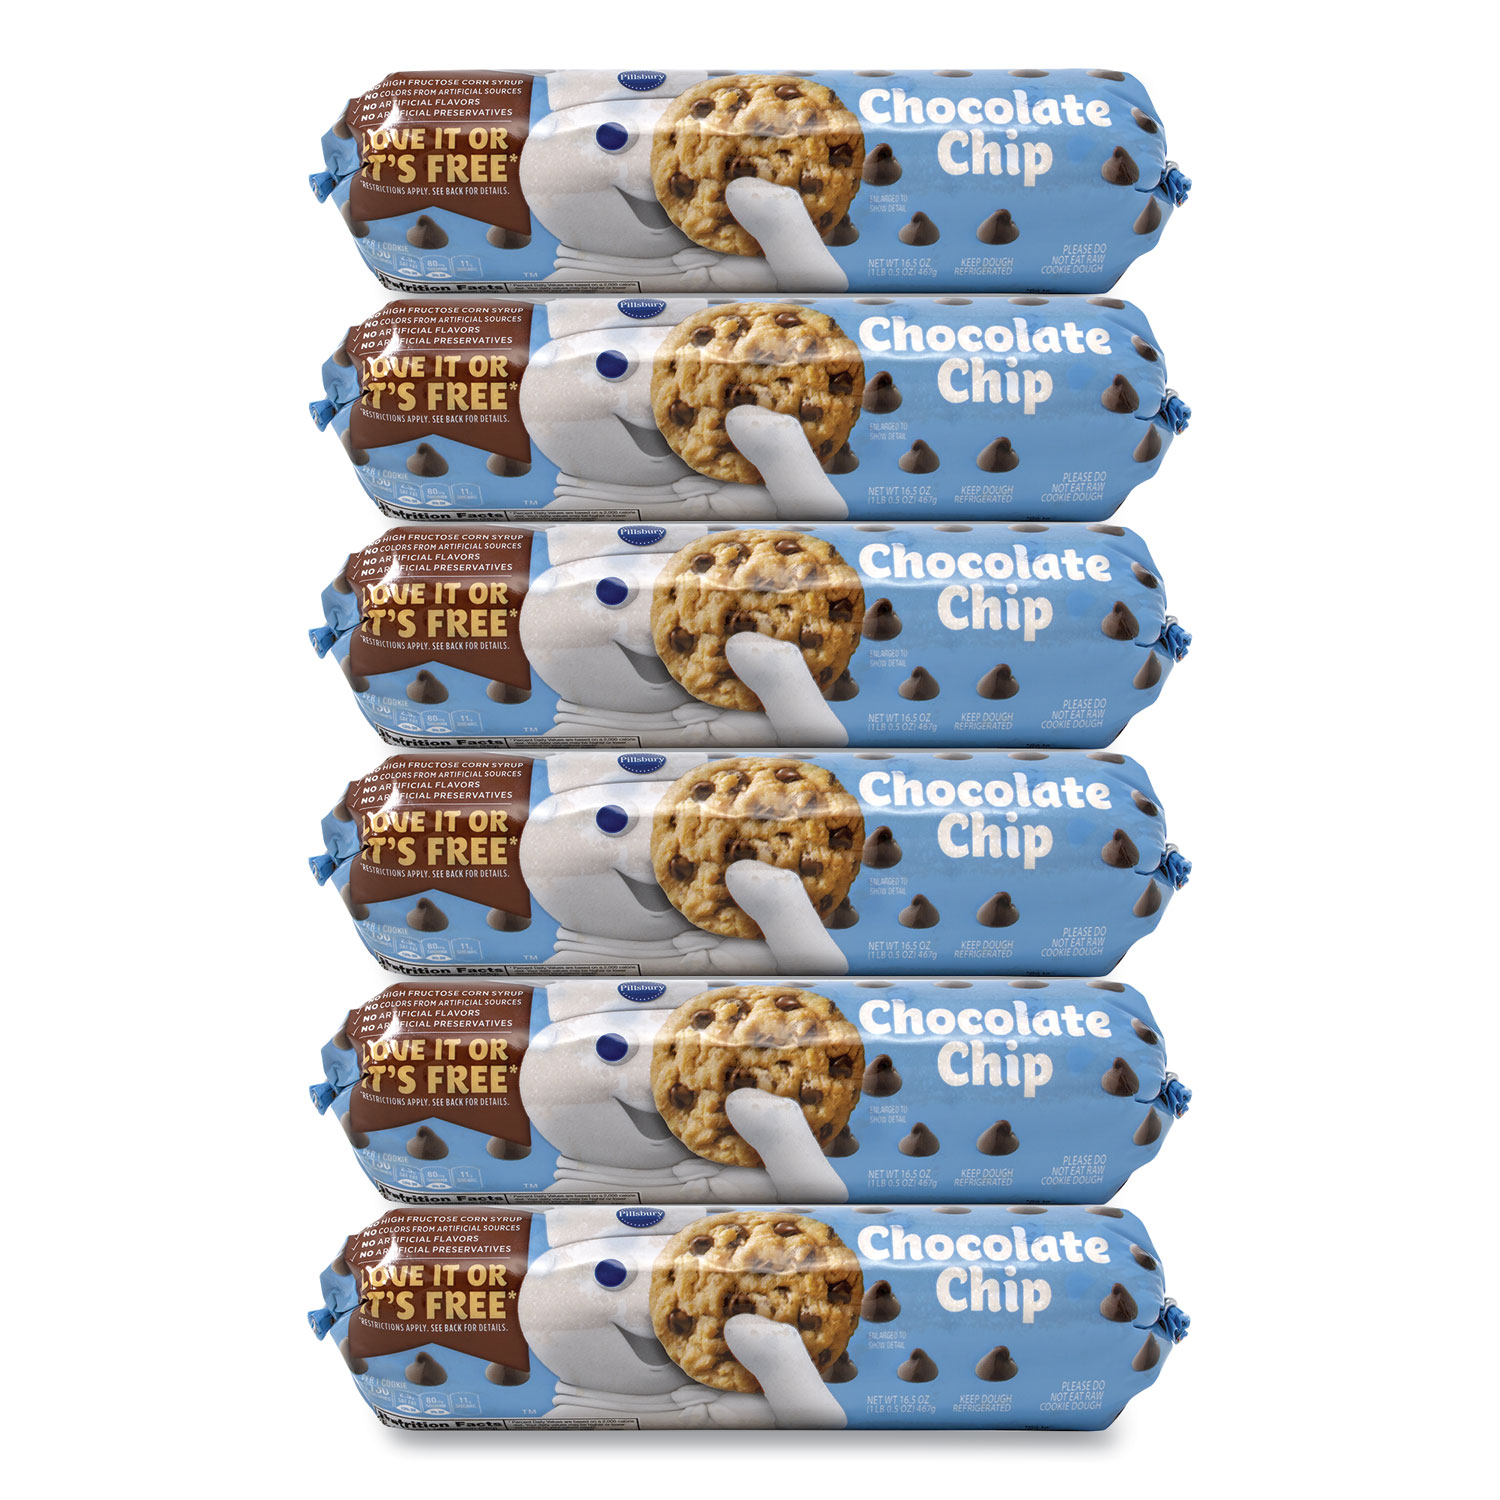  Pillsbury 731 Create 'N Bake Chocolate Chip Cookies, 16.5 oz Tube, 6 Tubes/Pack, Free Delivery in 1-4 Business Days (GRR90200455) 